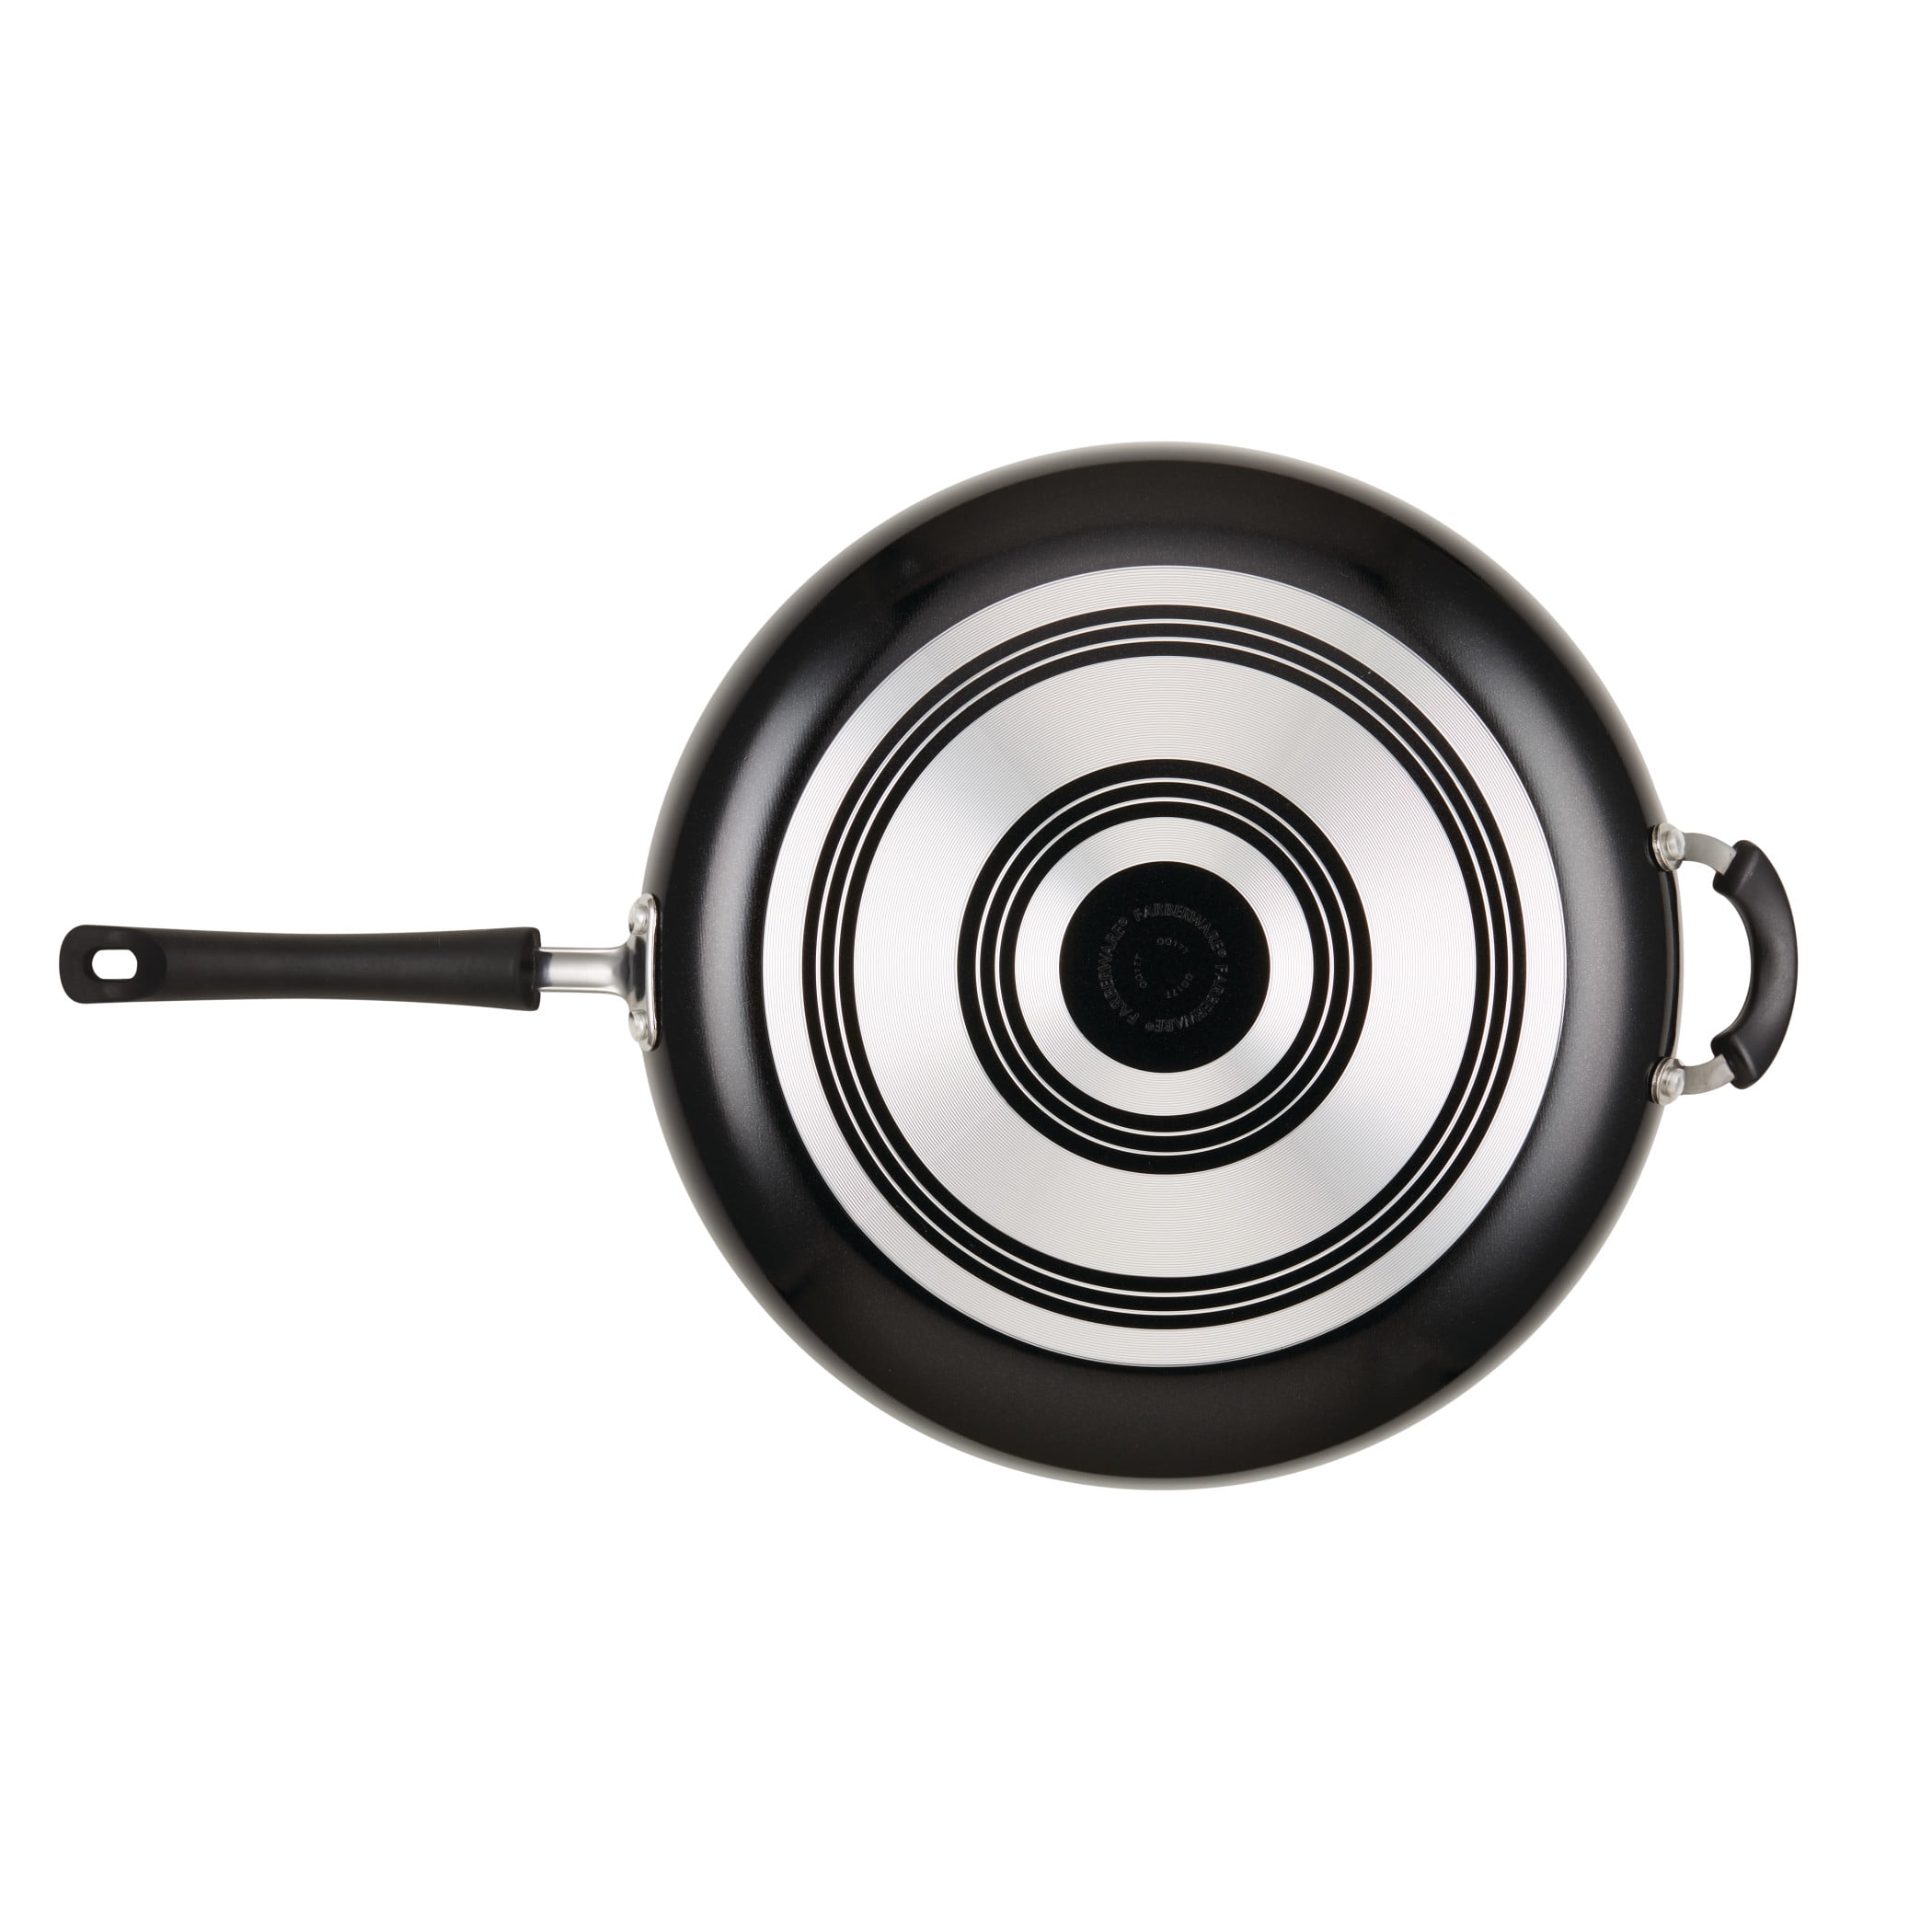 14-Inch Nonstick Family Pan with Lid — Farberware Cookware